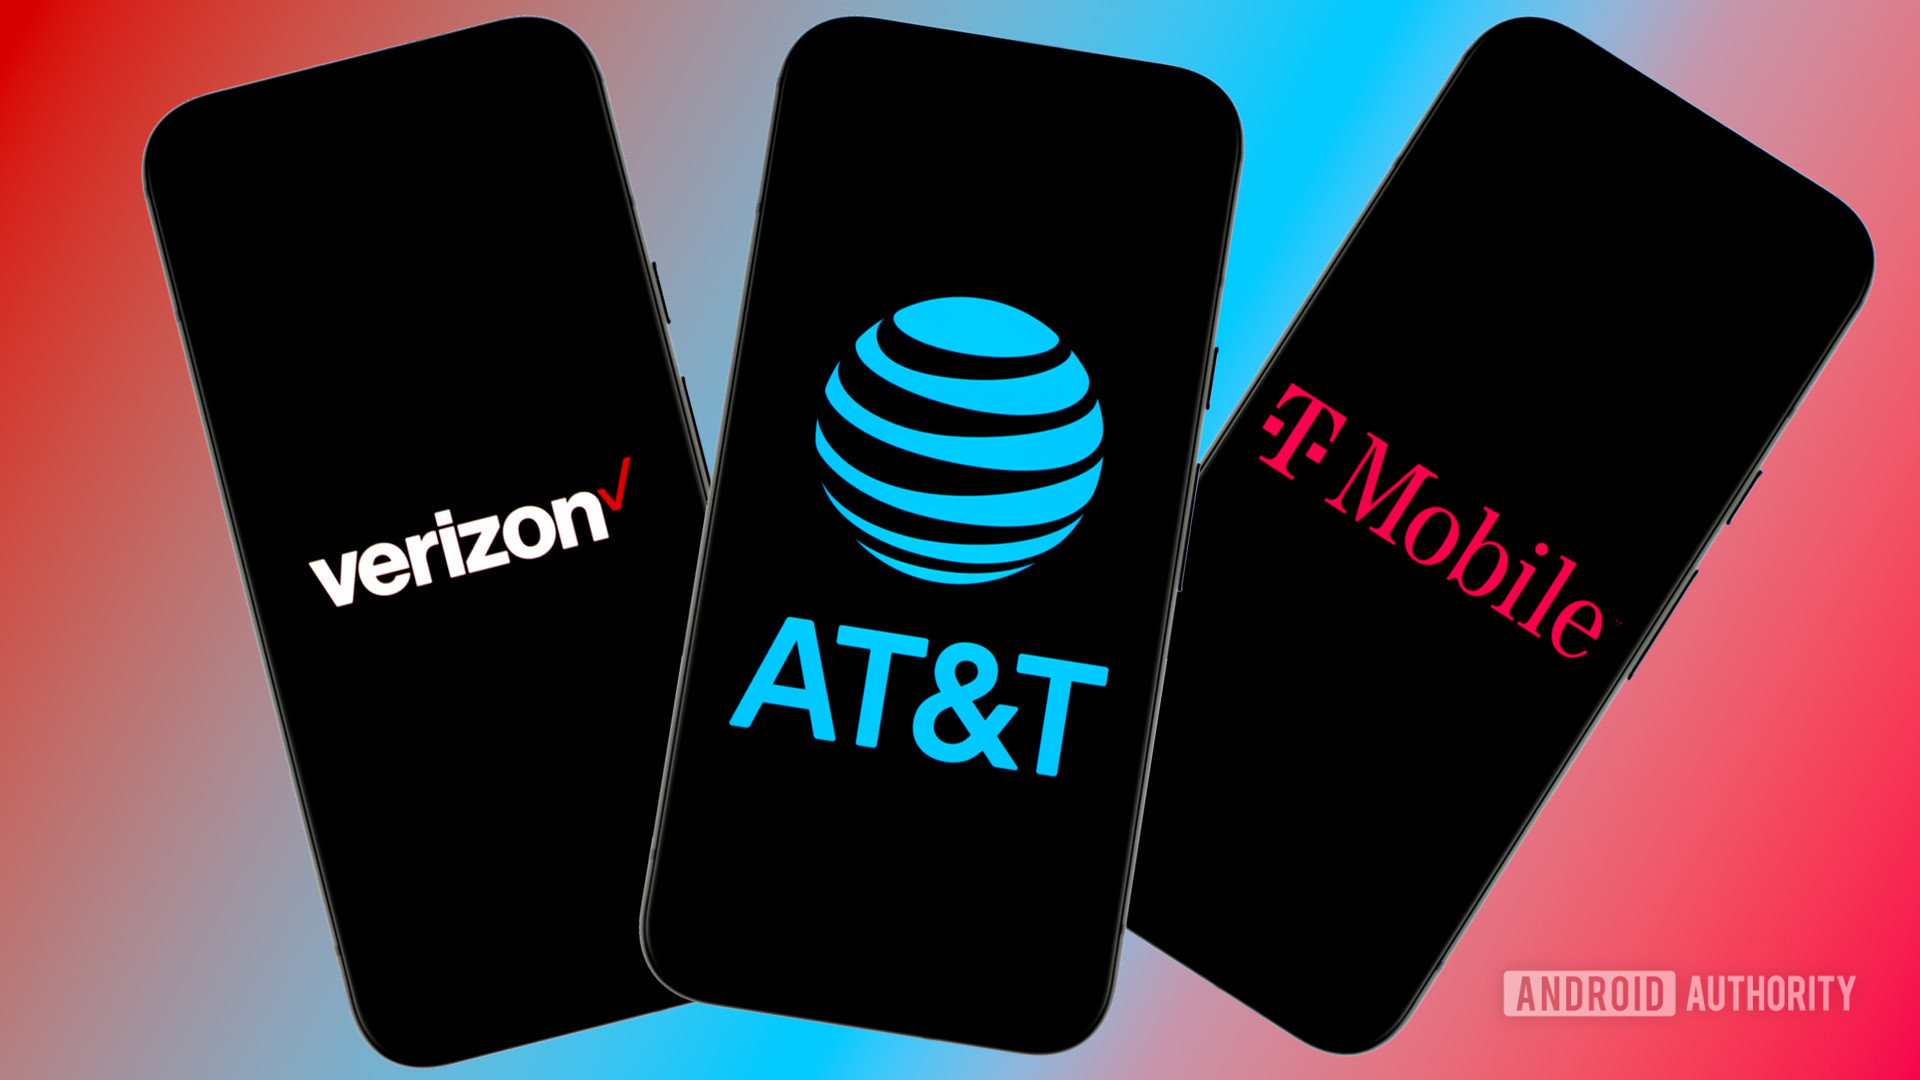 Stock photo of major US carriers Verizon Wireless, AT&T, and T Mobile (7)